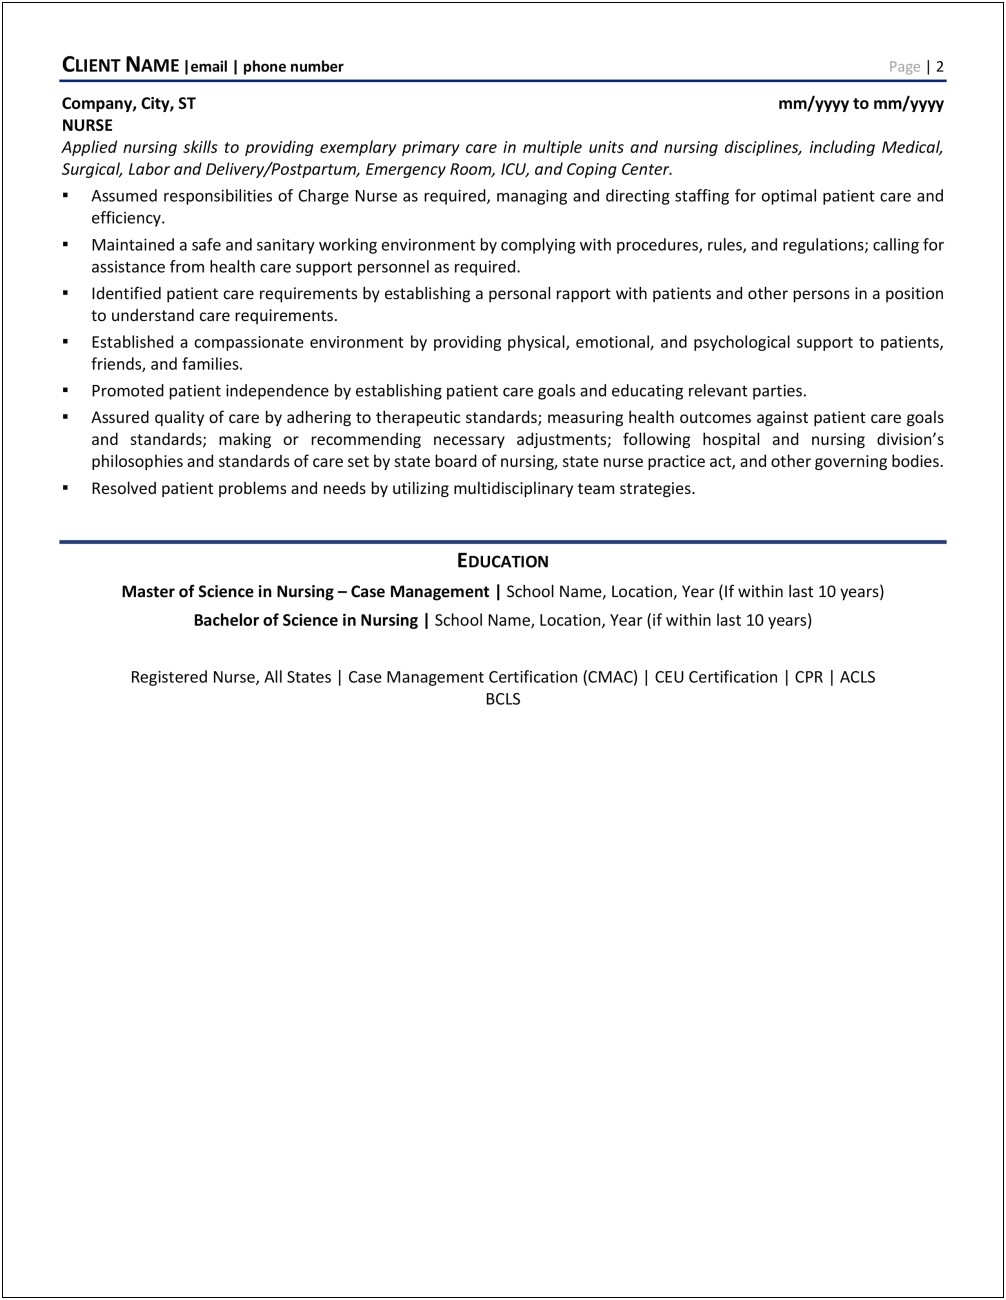 Professional Resume For Case Manager